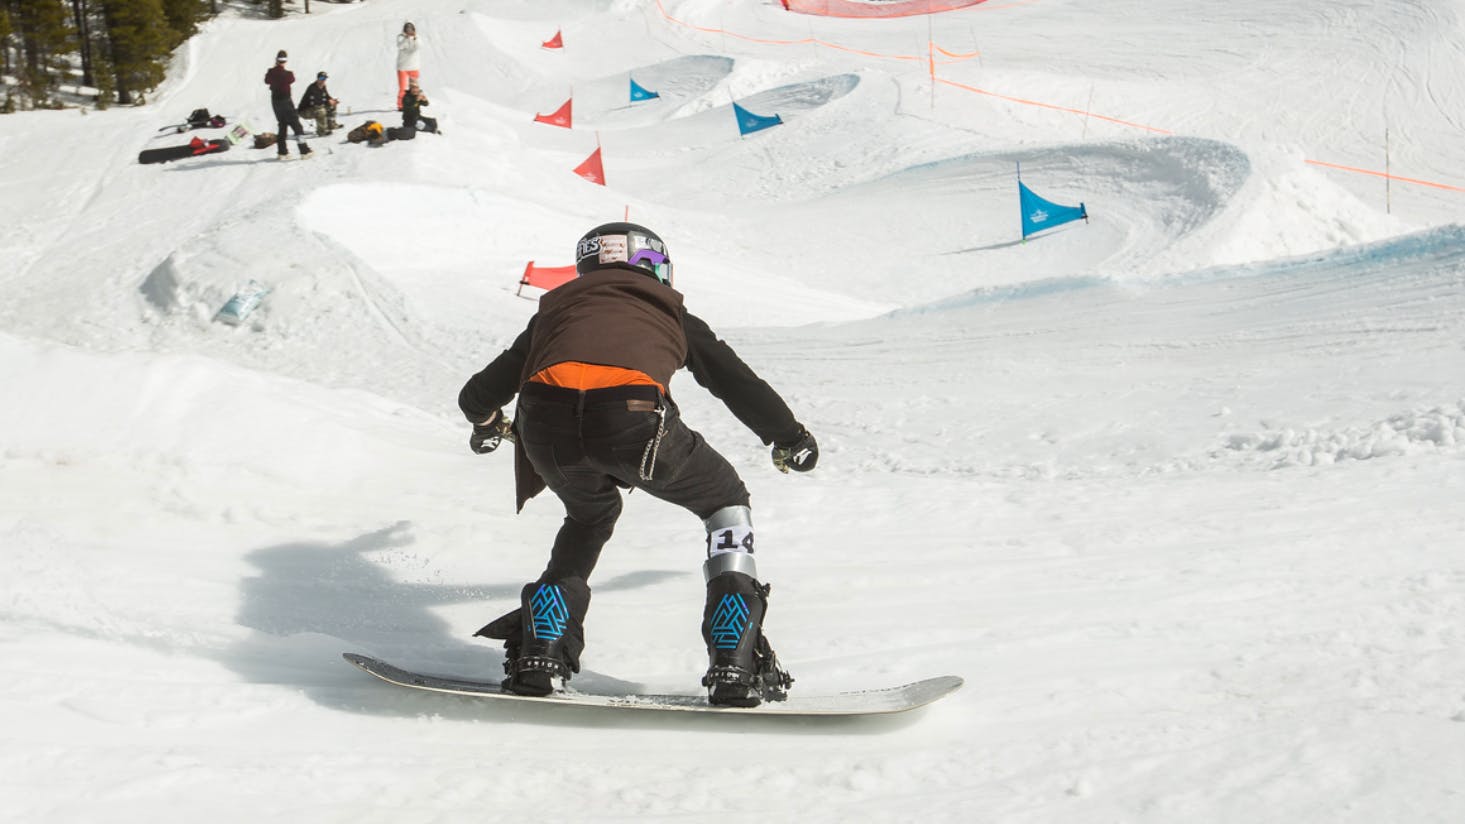 A snowboarder riding a snowboard with the Atlas Pro snowboard bindings.